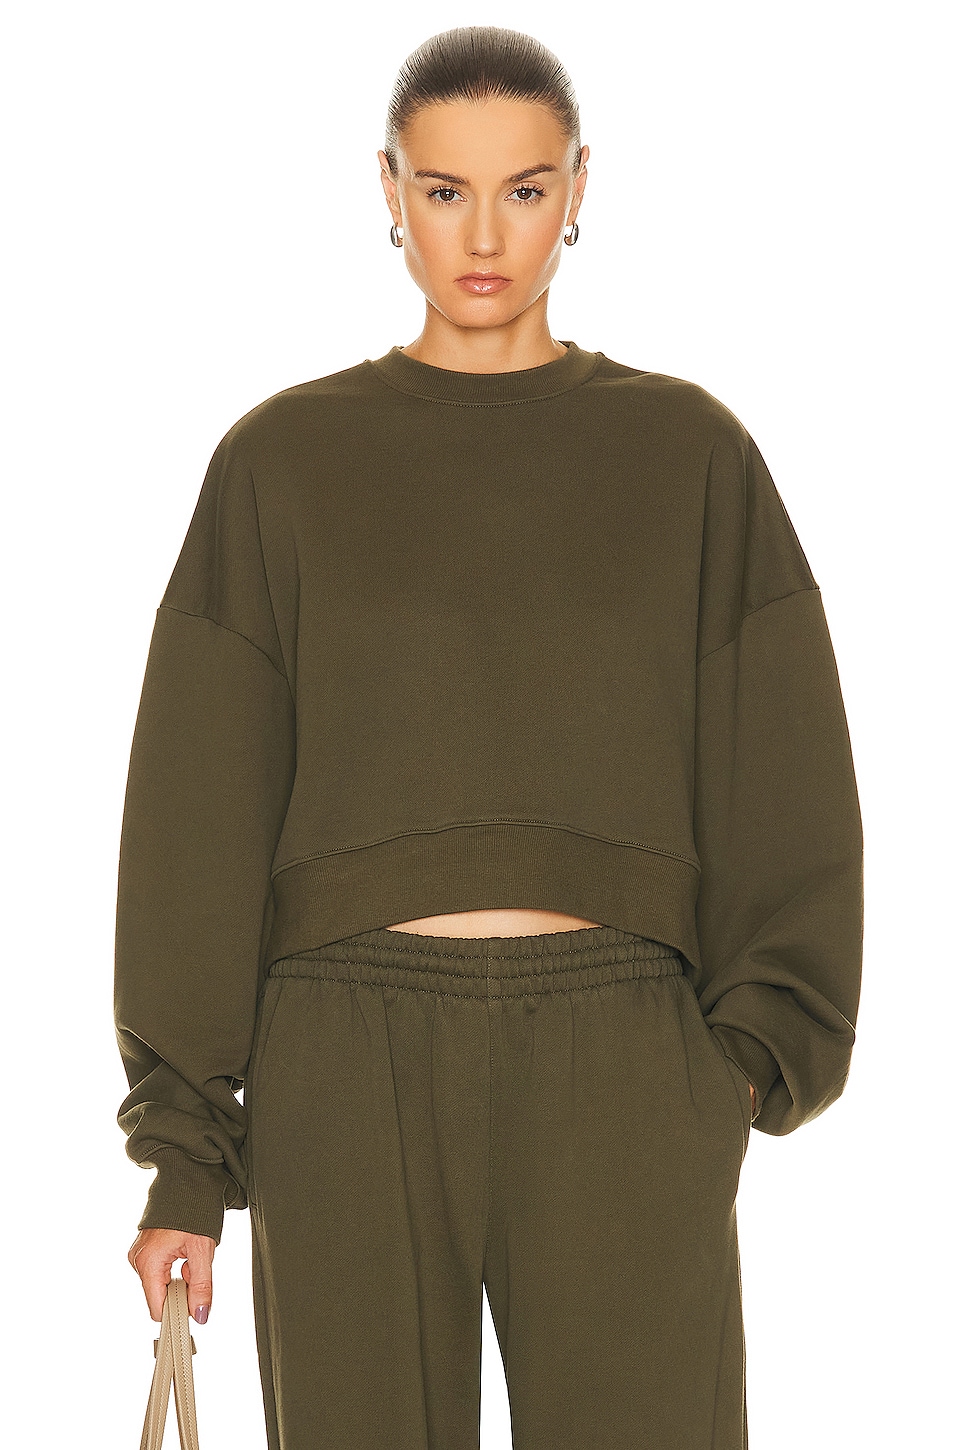 Image 1 of WARDROBE.NYC HB Track Top in Dark Military